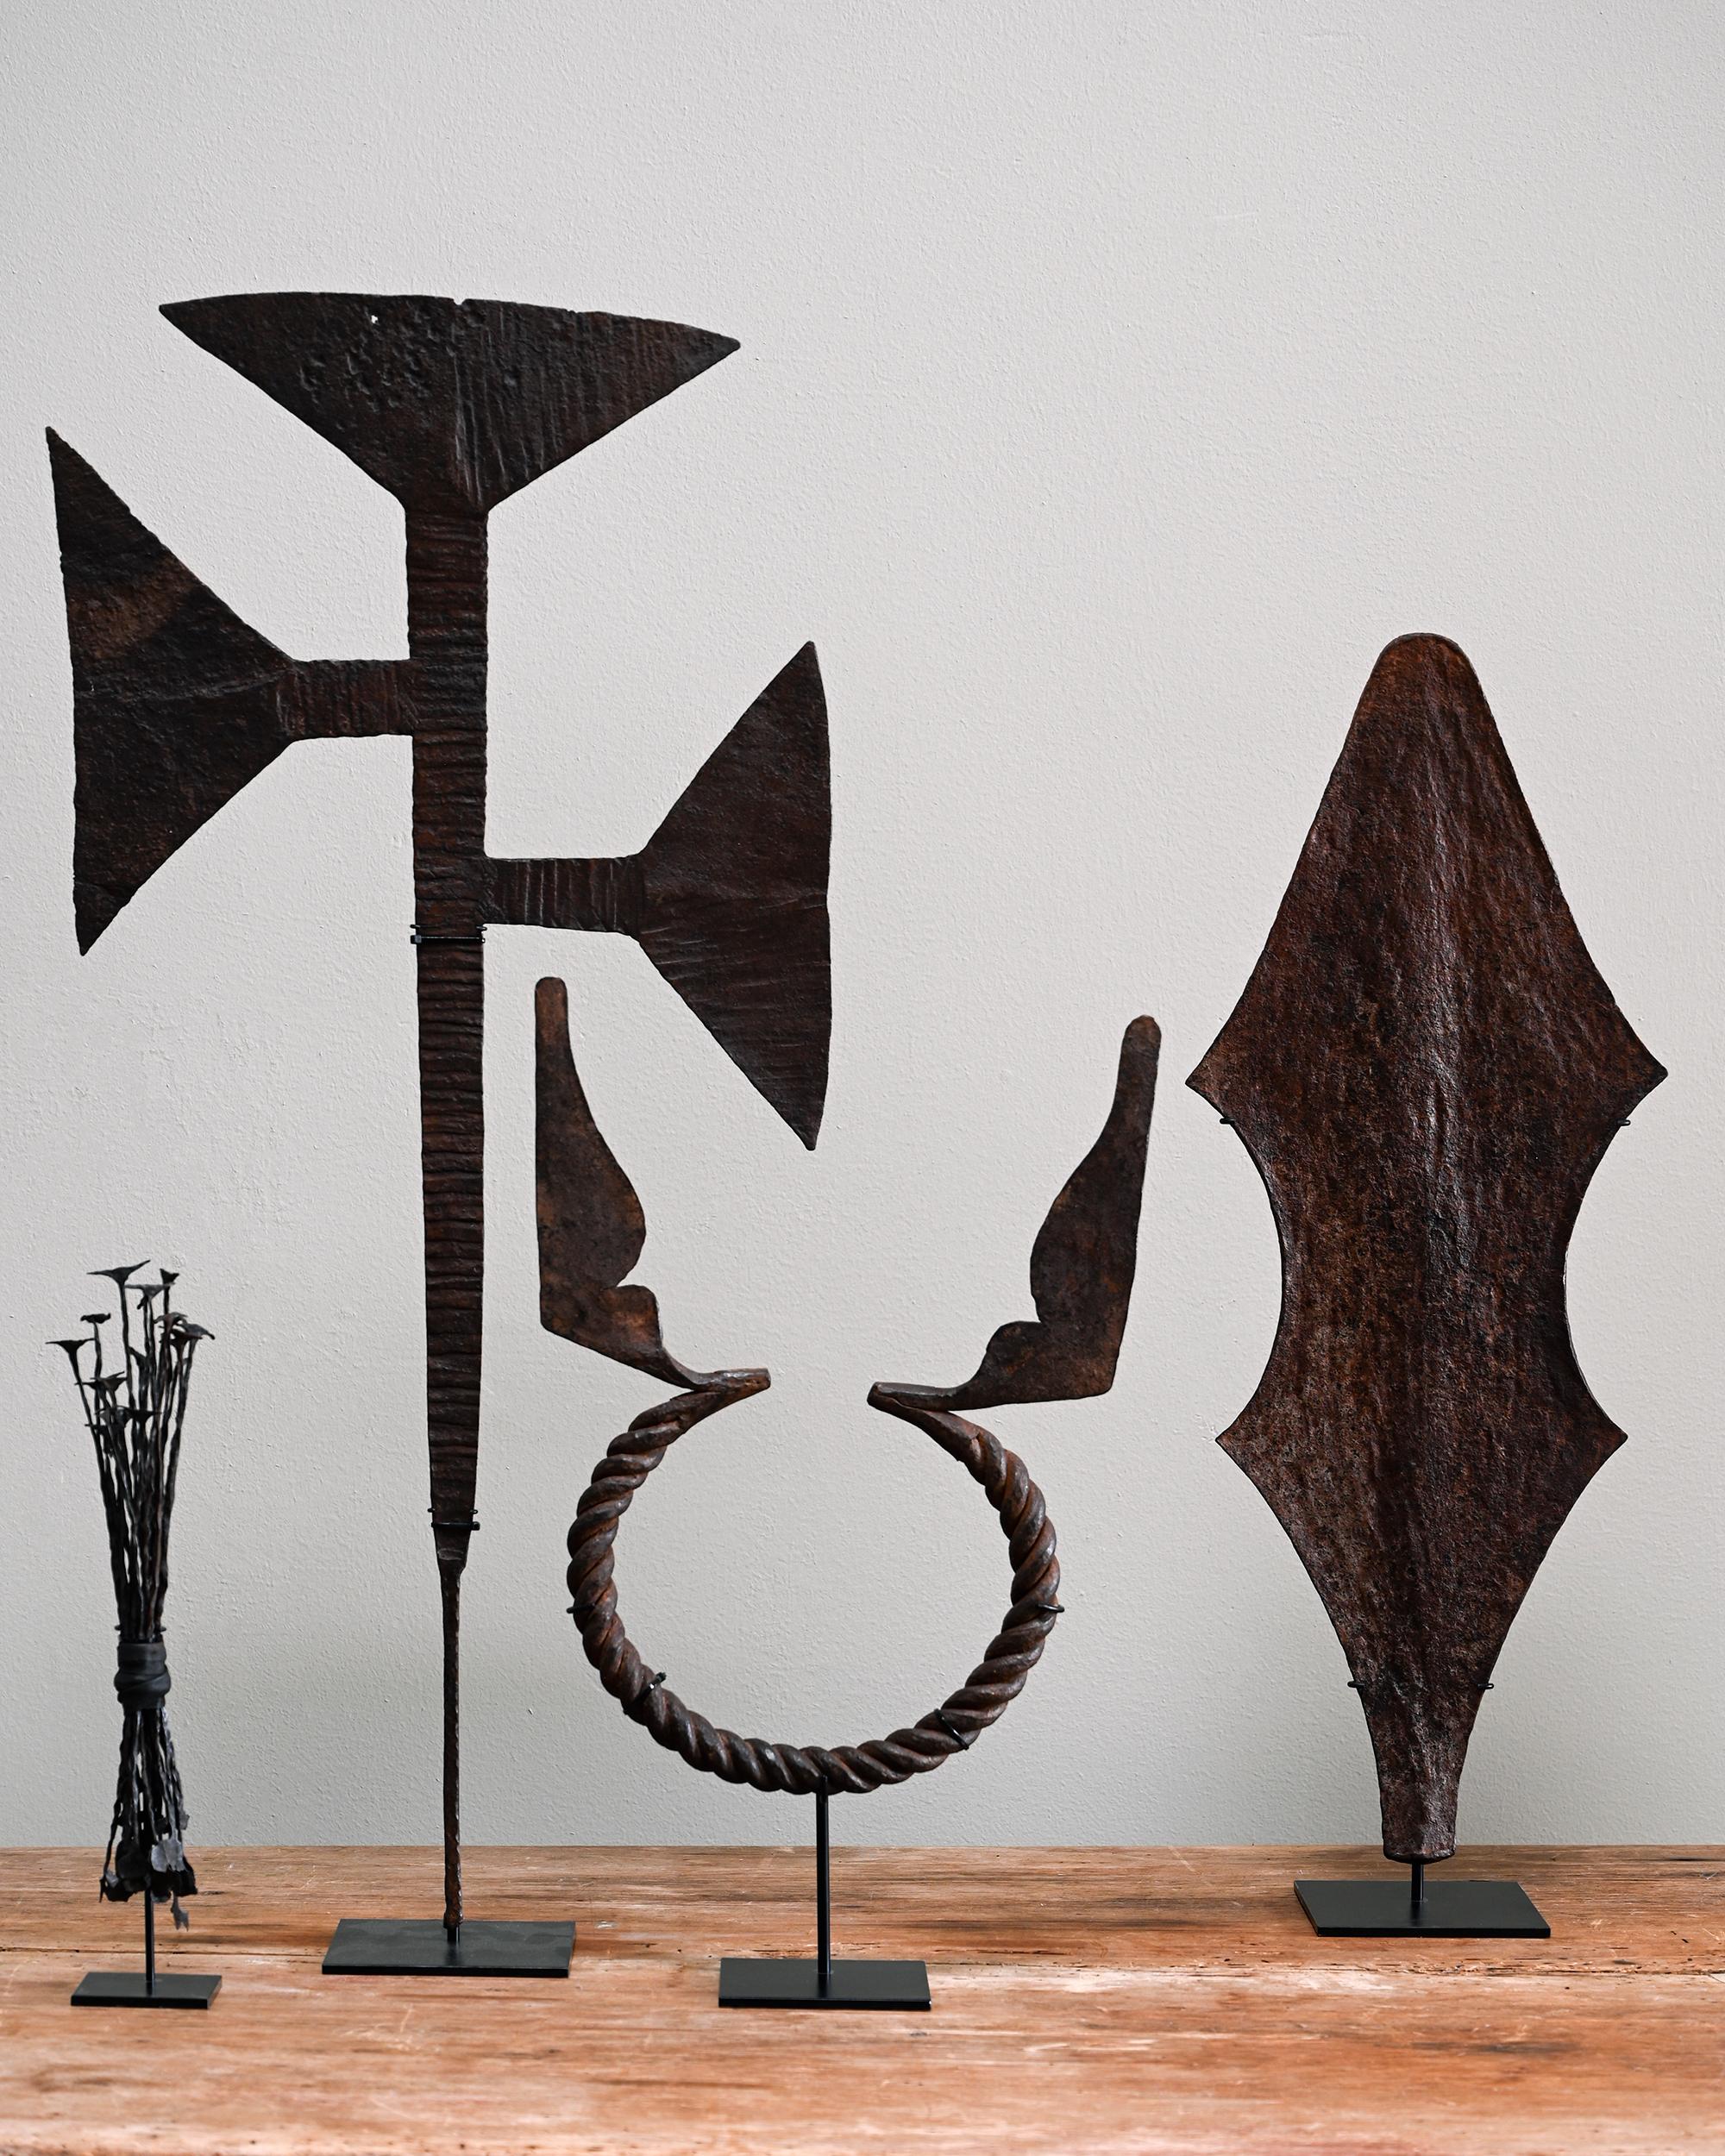 Fine collection of four 18th - 19th century African Tribal currency's on stand from the world renowned collector and author Roberto Ballarini. 

From left to right

1. Toma, Kissi (Kisi,Ghisi, Gizi) Currency in forged iron made by the Toma tribe